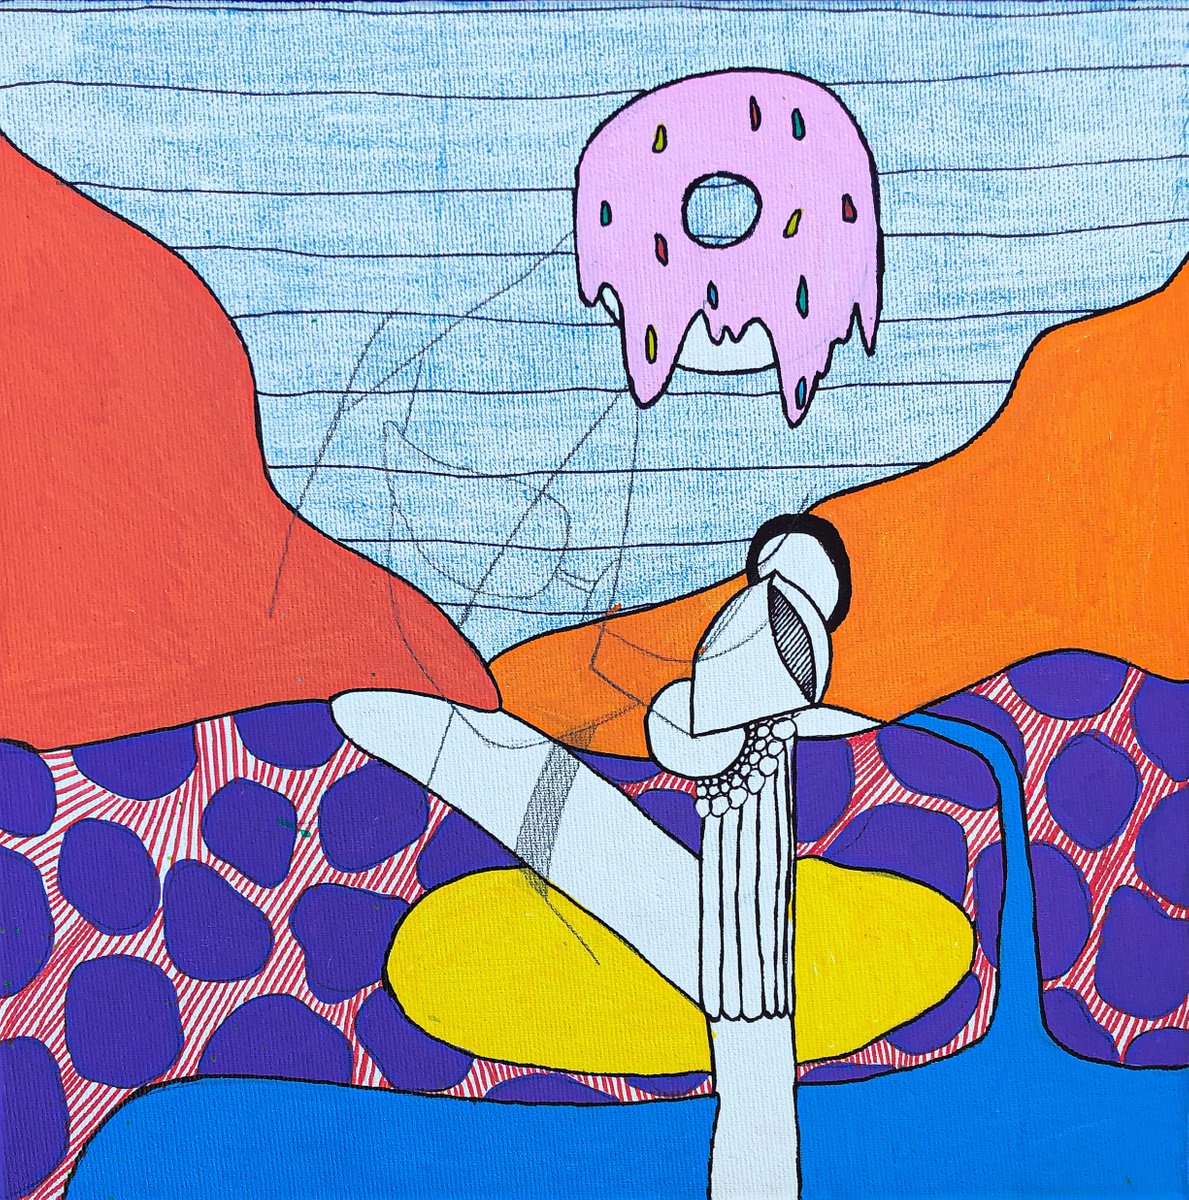 DEEP THOUGHTS OF THE DONUT by Magdalena Bukowska